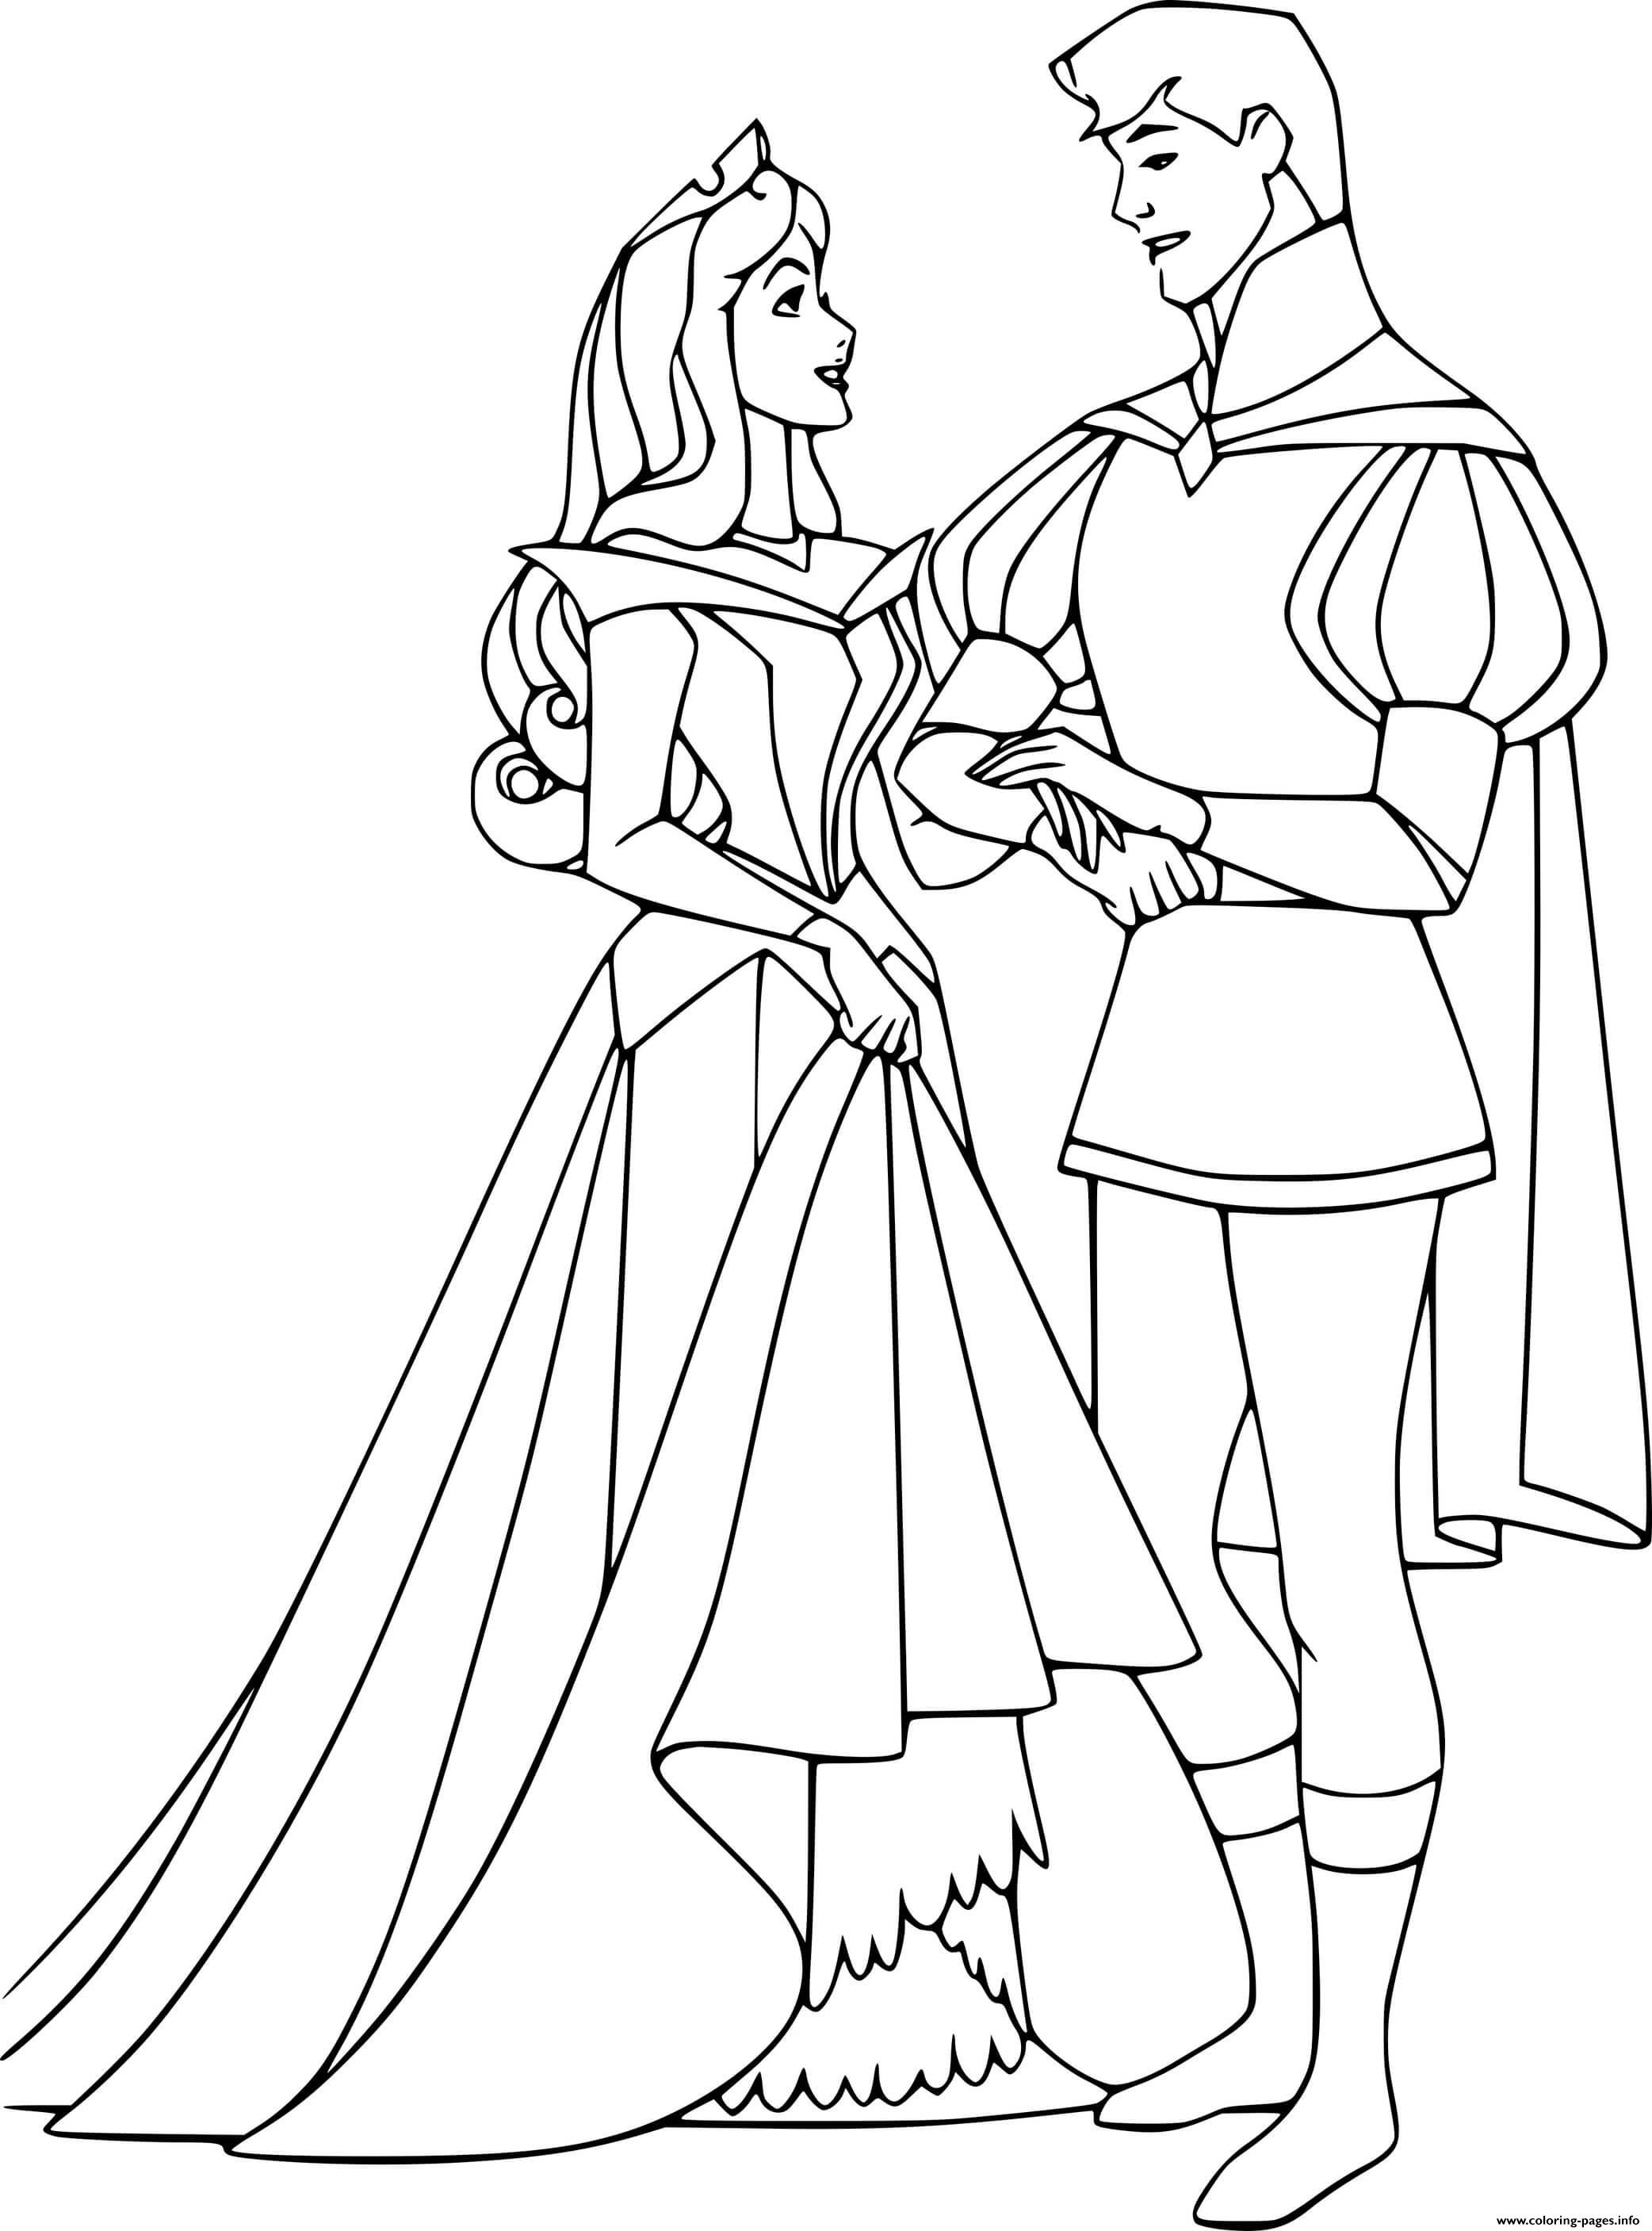 Prince Phillip And Sleeping Beauty Coloring page Printable